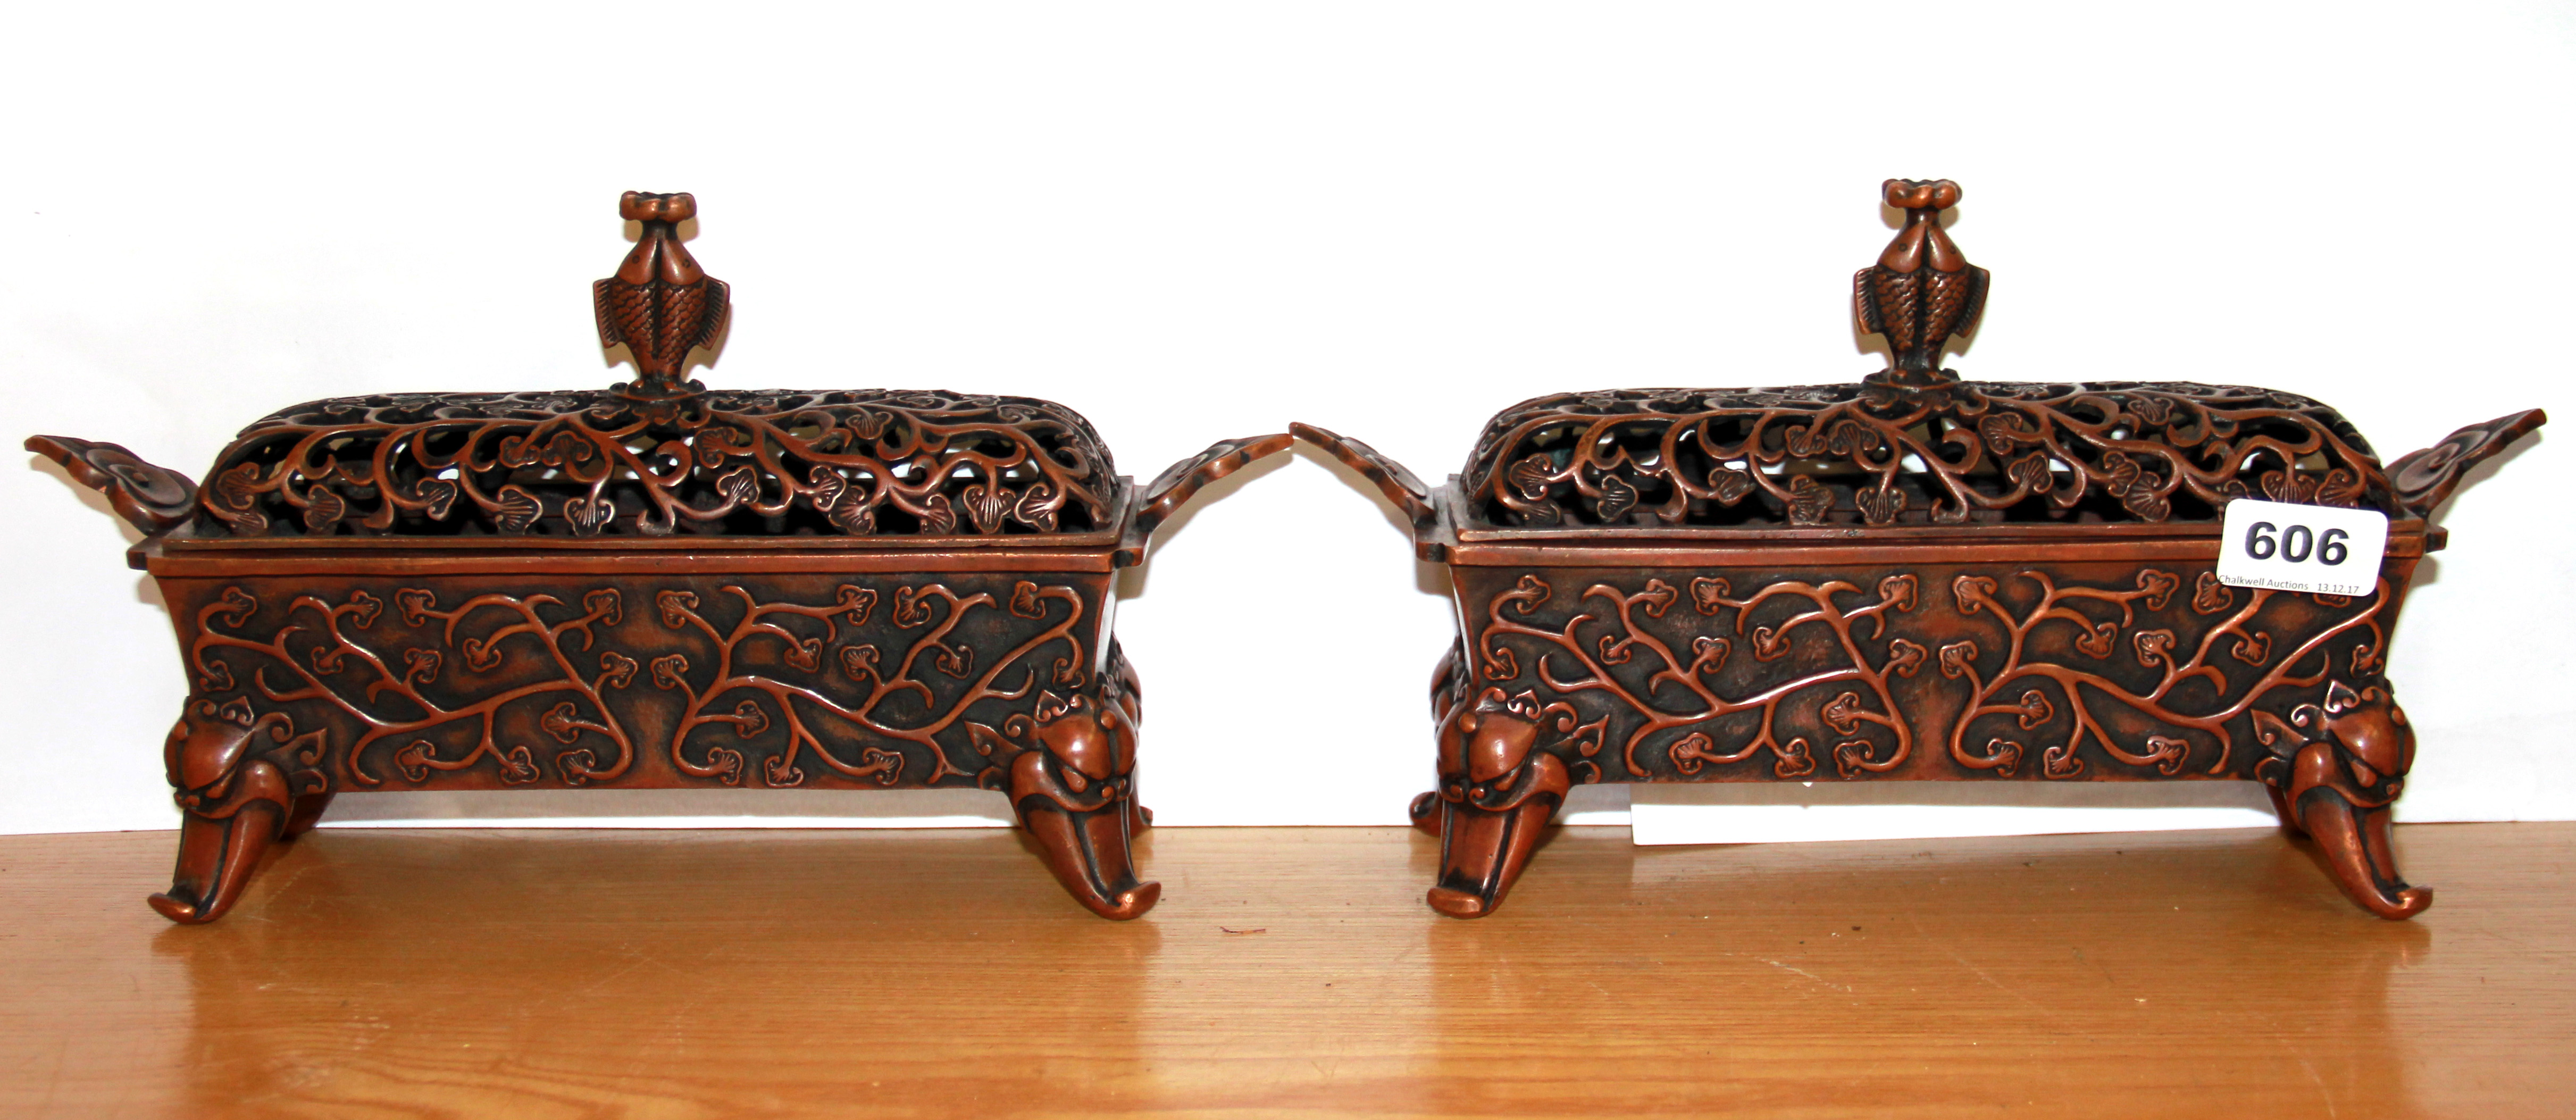 A pair of lovely quality Tibetan bronze censers with elephant head feet and double fish handles,